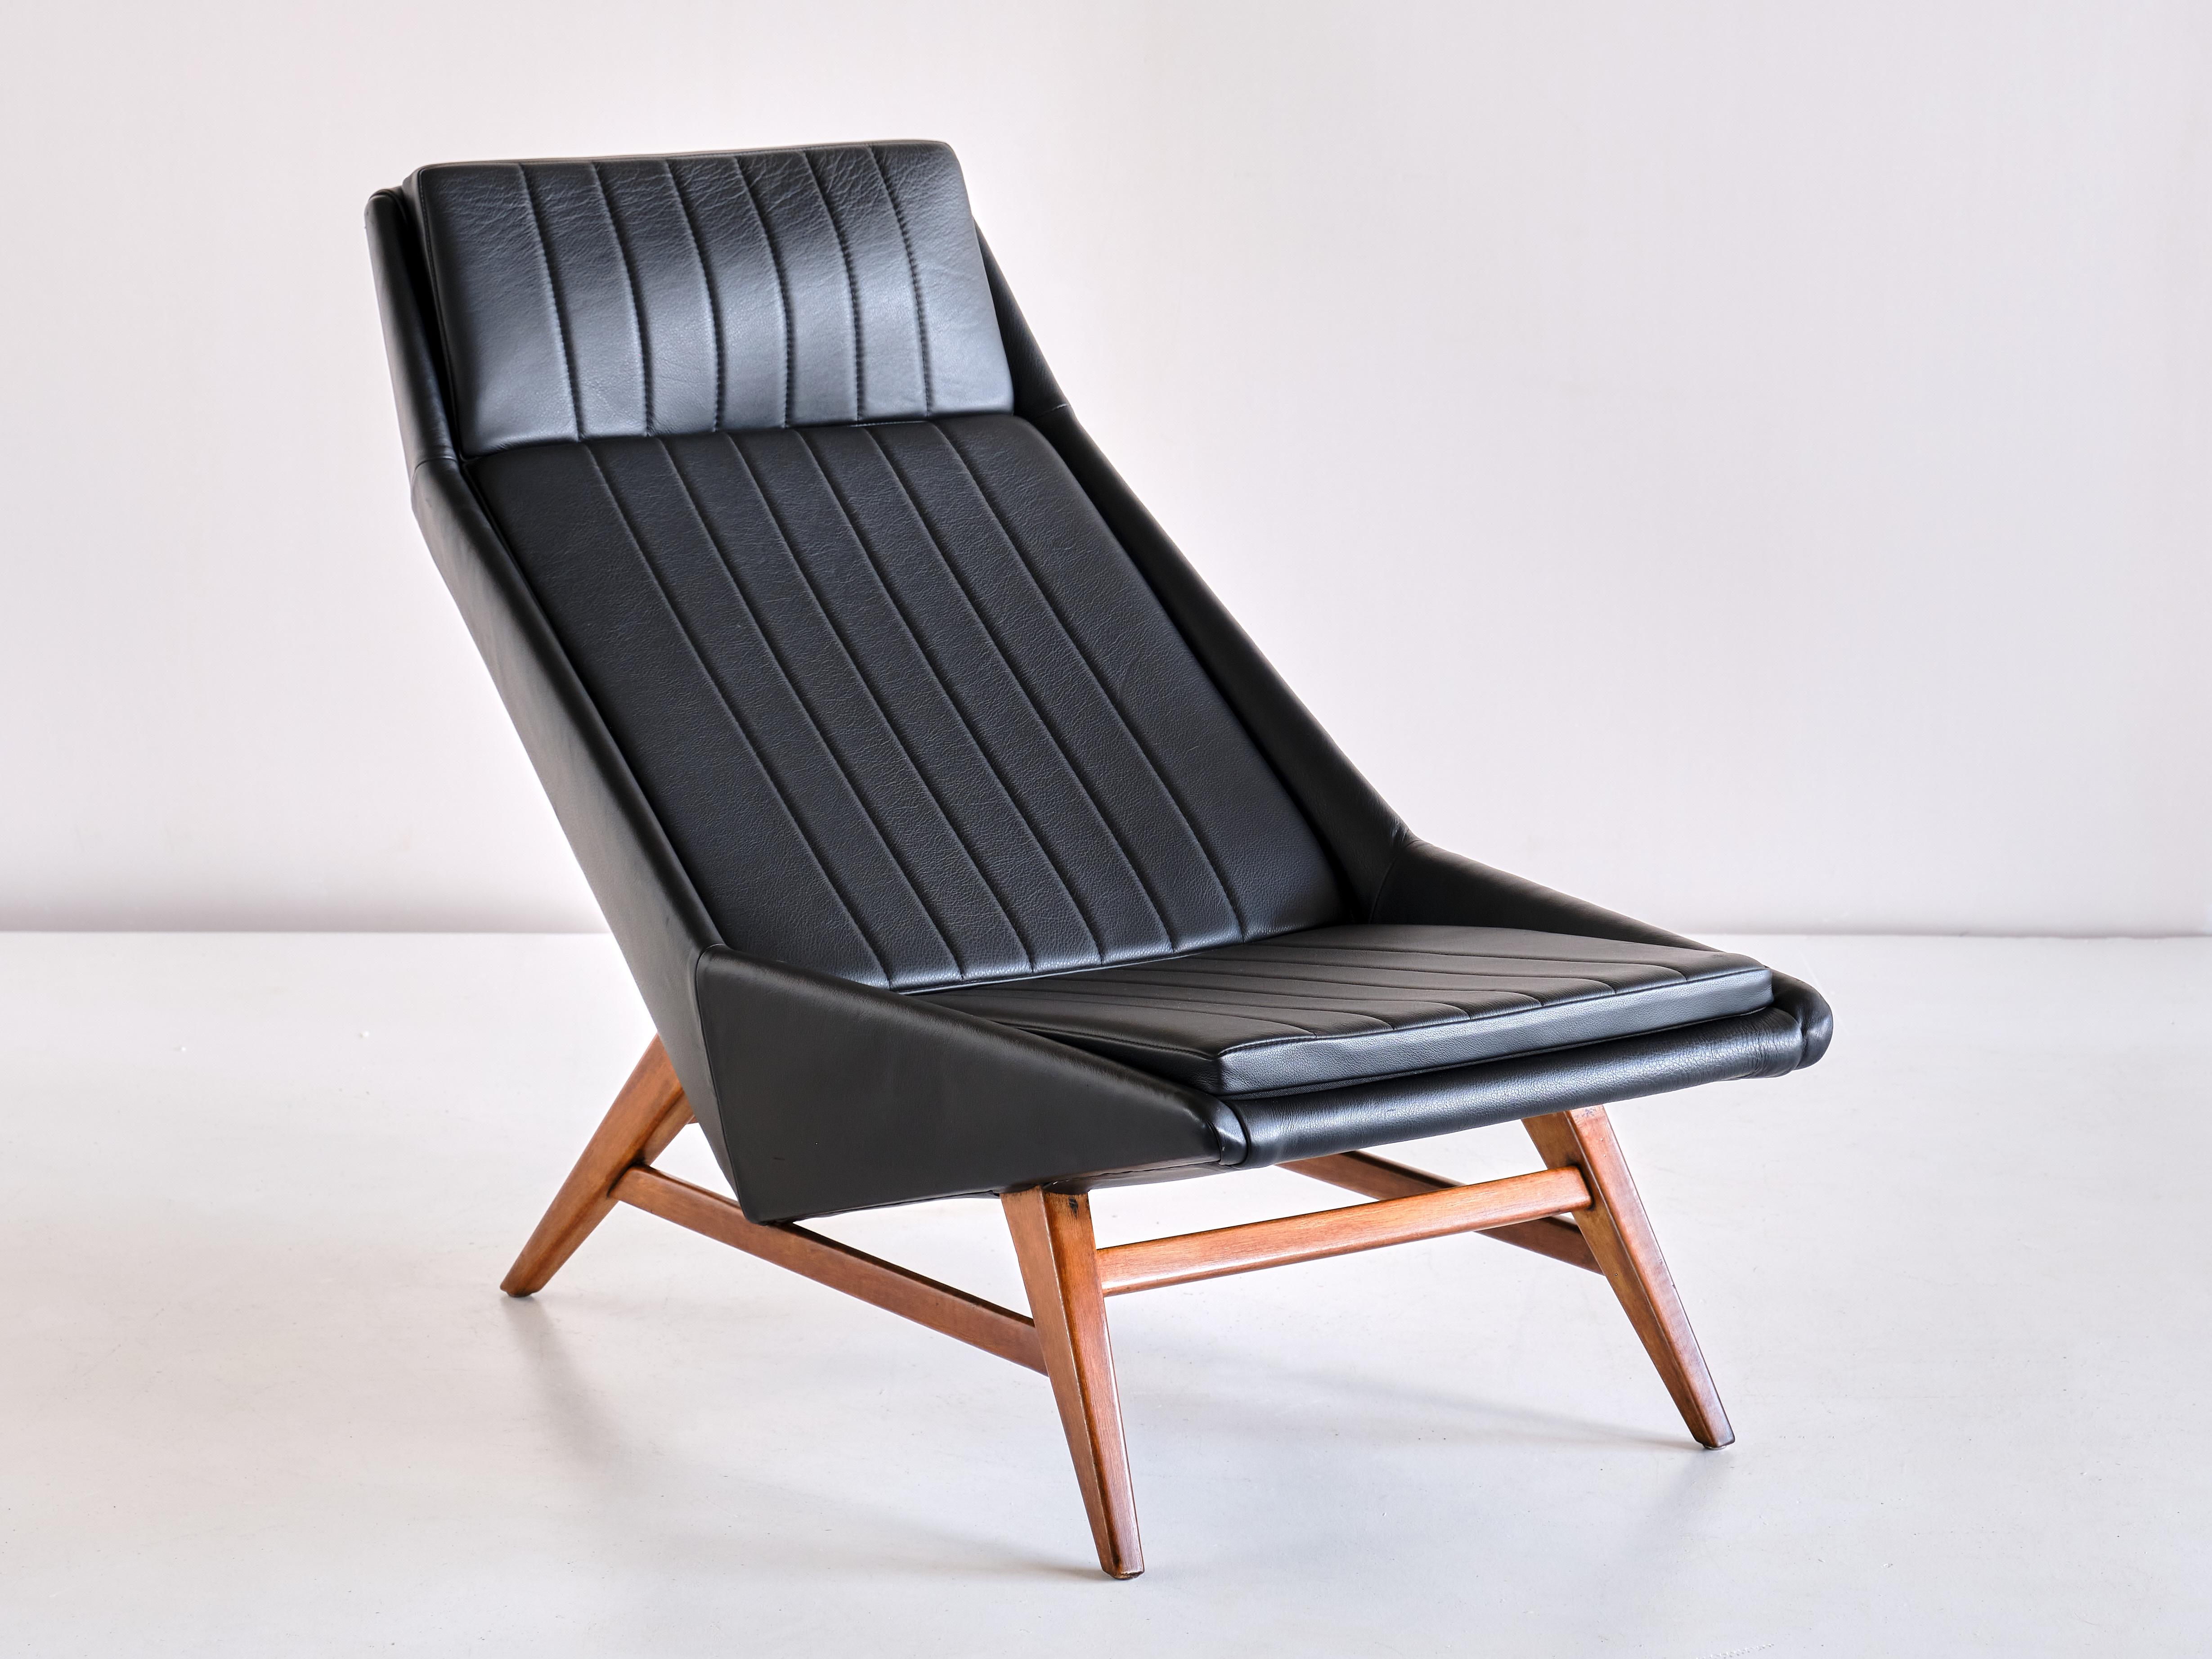 This extremely rare lounge chair was designed by Svante Skogh and produced by the manufacturer AB Hjertquist & Co in Nässjö, Sweden. This model -number 905- was designed by Skogh in 1955 and was produced for a very short period only. This particular